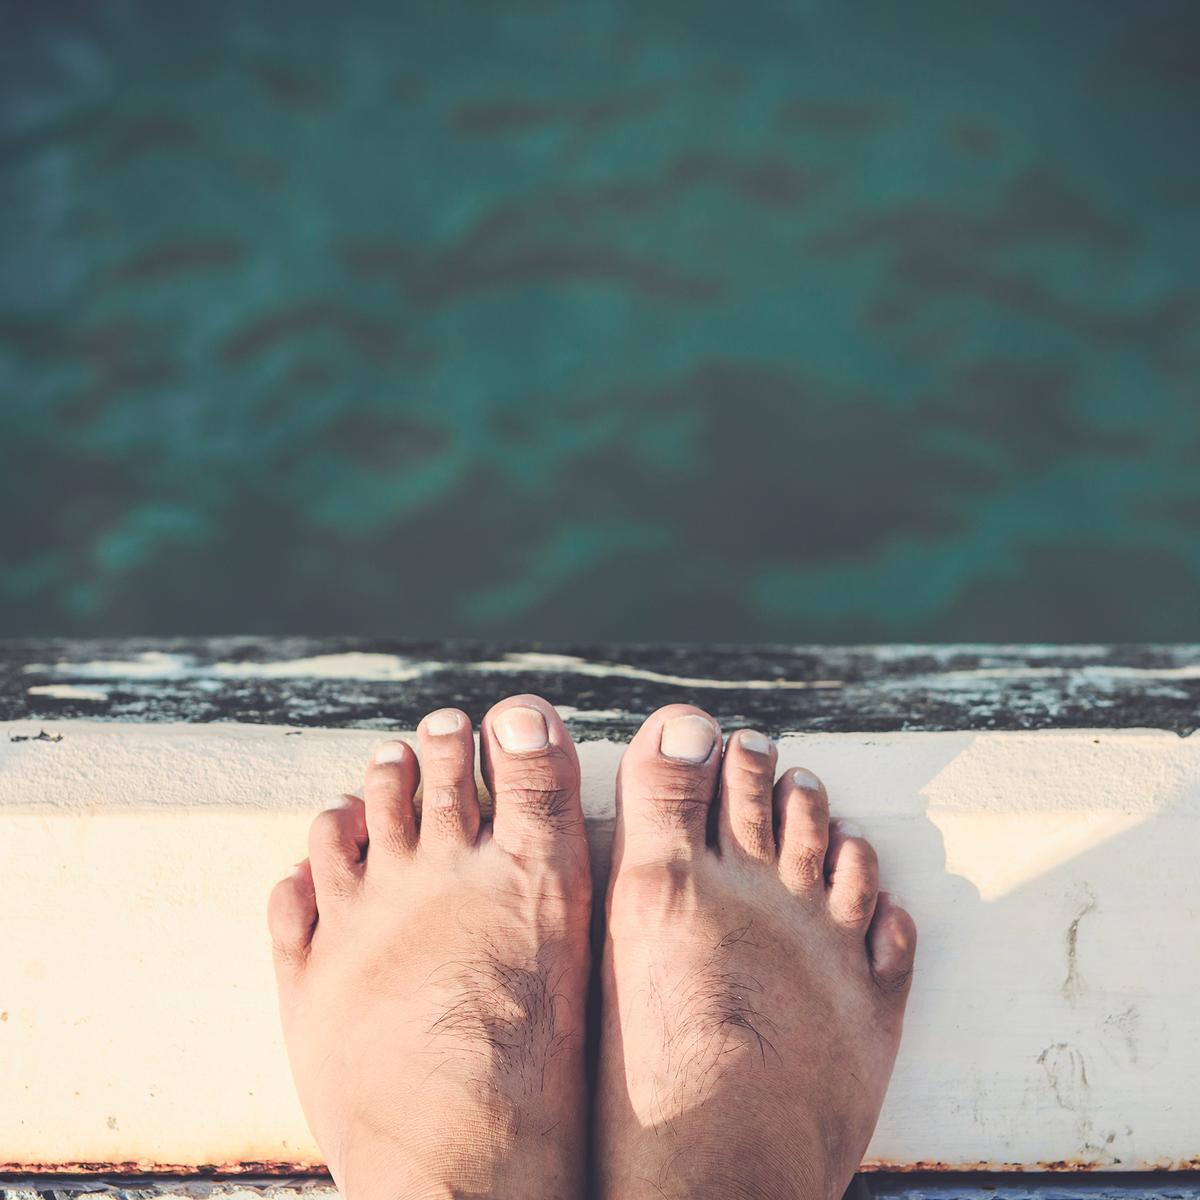 A close up shot looking down upon the toes and feet of a person balanced on the edge of a jetty over water